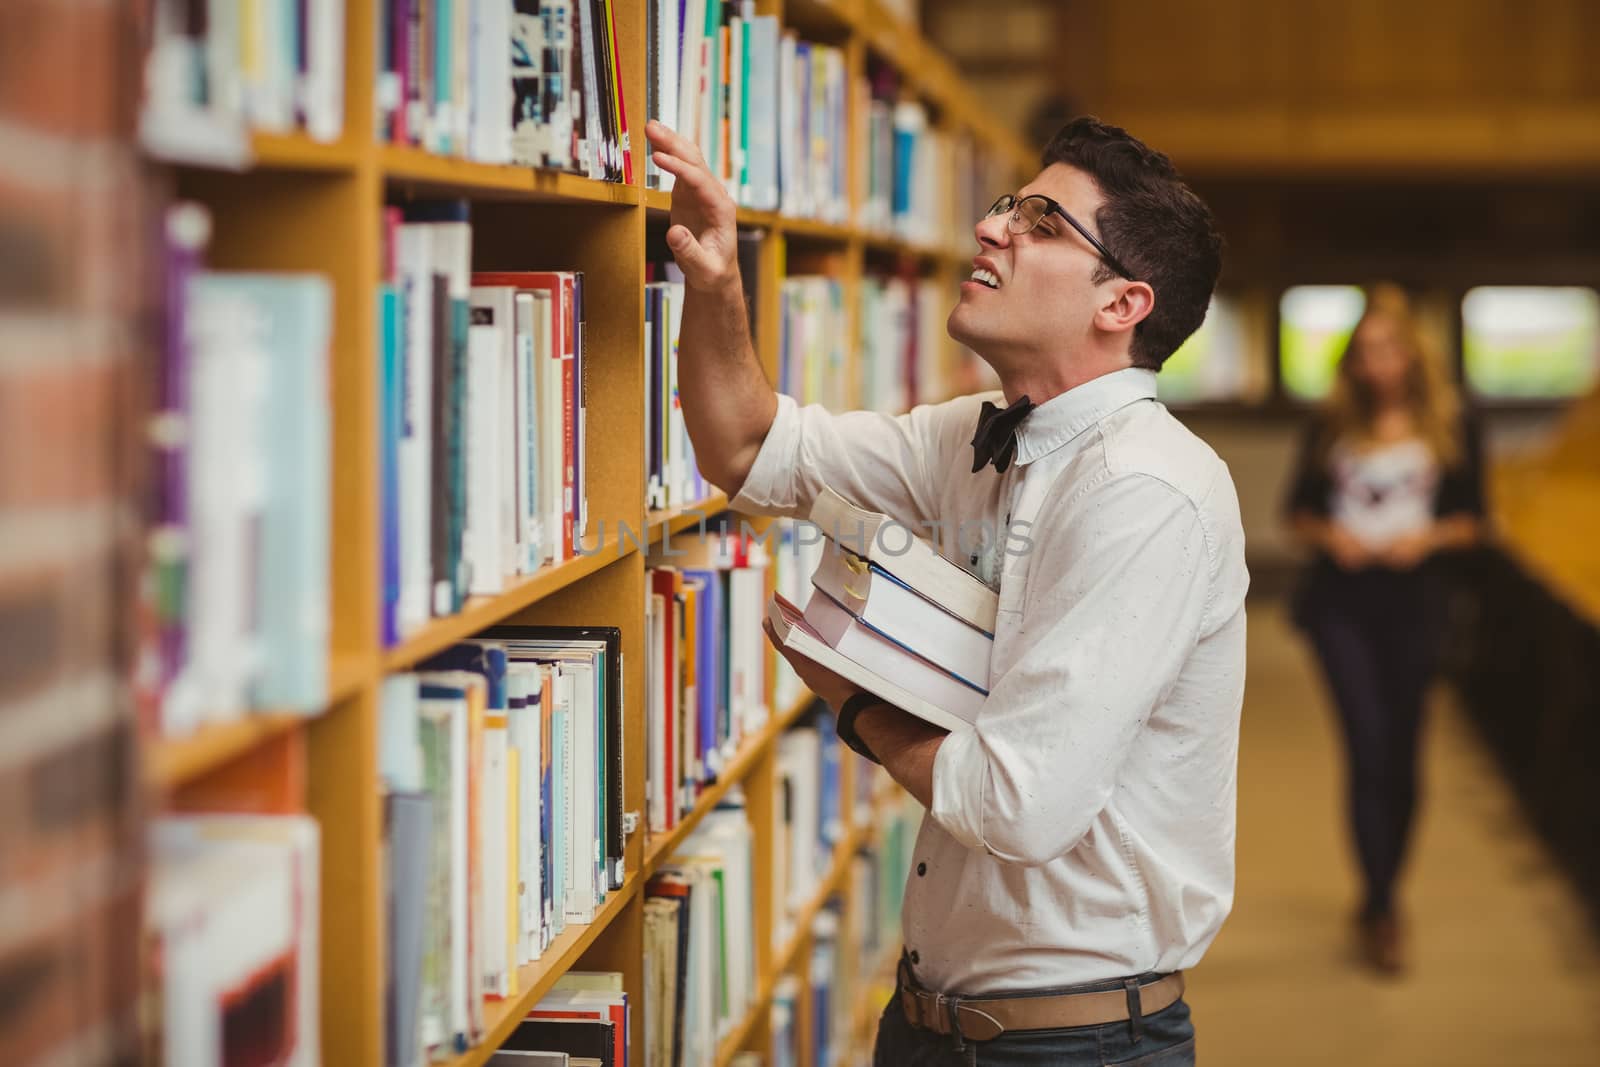 Nerd searching book while girl walking to him in library